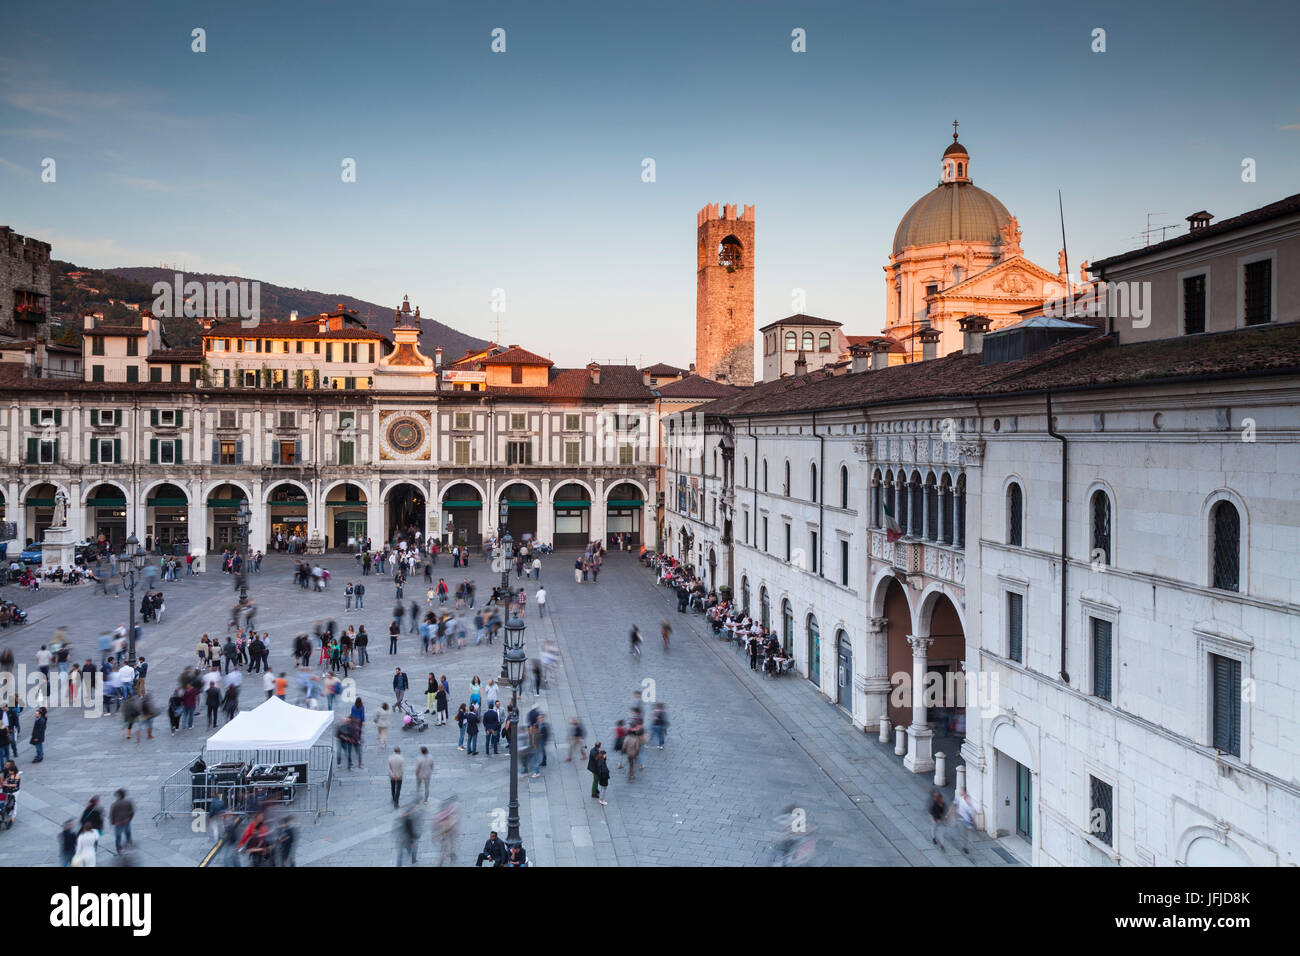 Brescia, Lombardy, Italy, Loggia square and Brescia's cathedral at sunset view from a balcony of Loggia's building Stock Photo